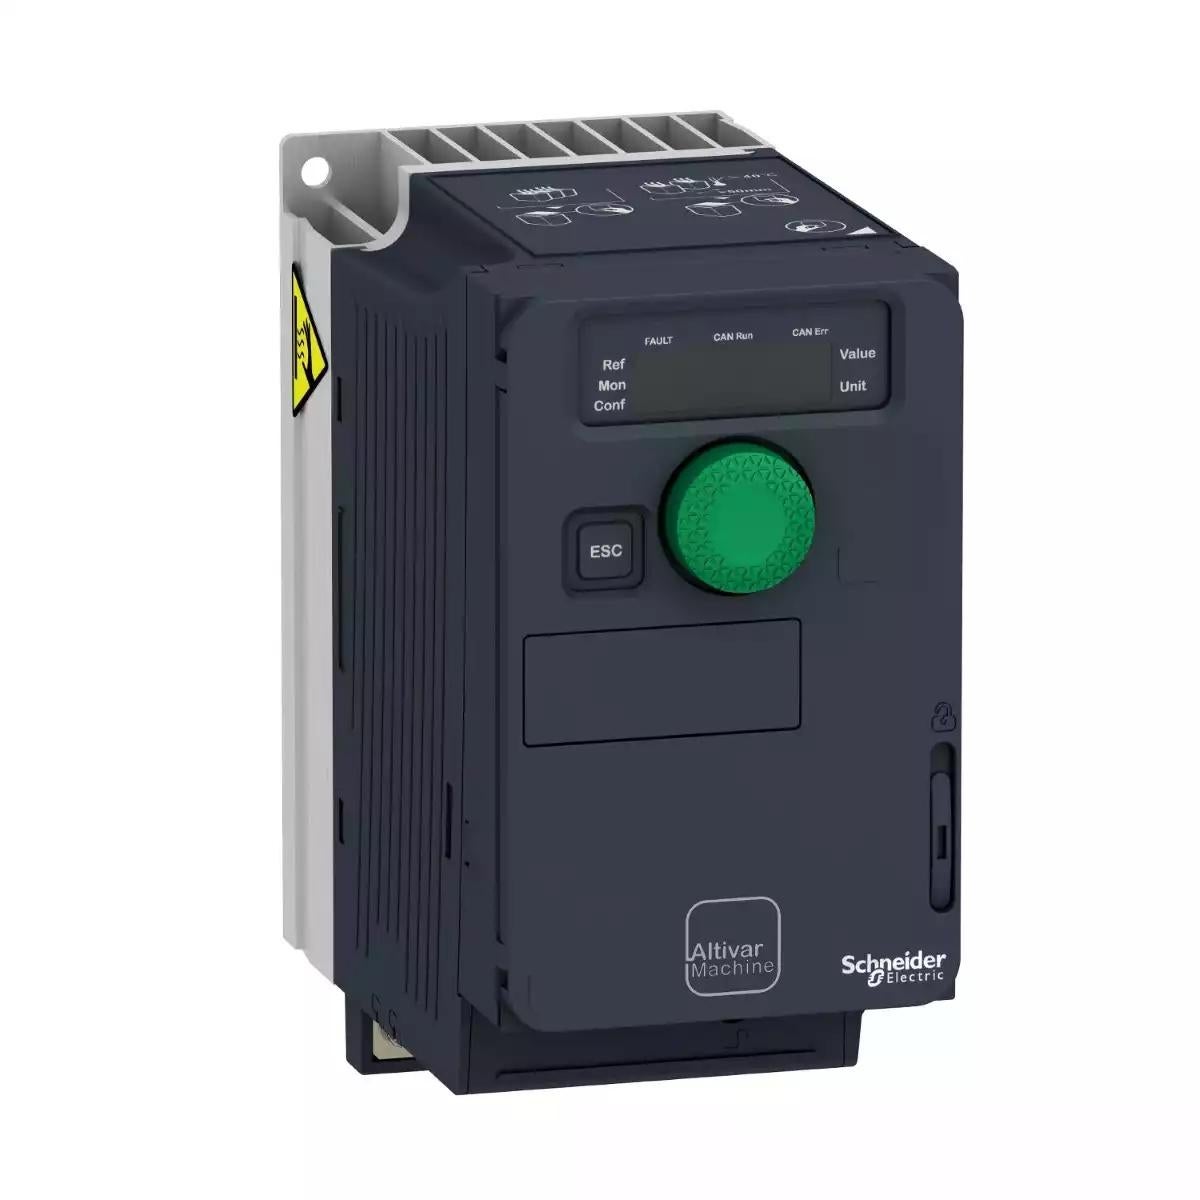 variable speed drive, Altivar Machine ATV320, 0.55kW, 200 to 240V, 1 phase, compact